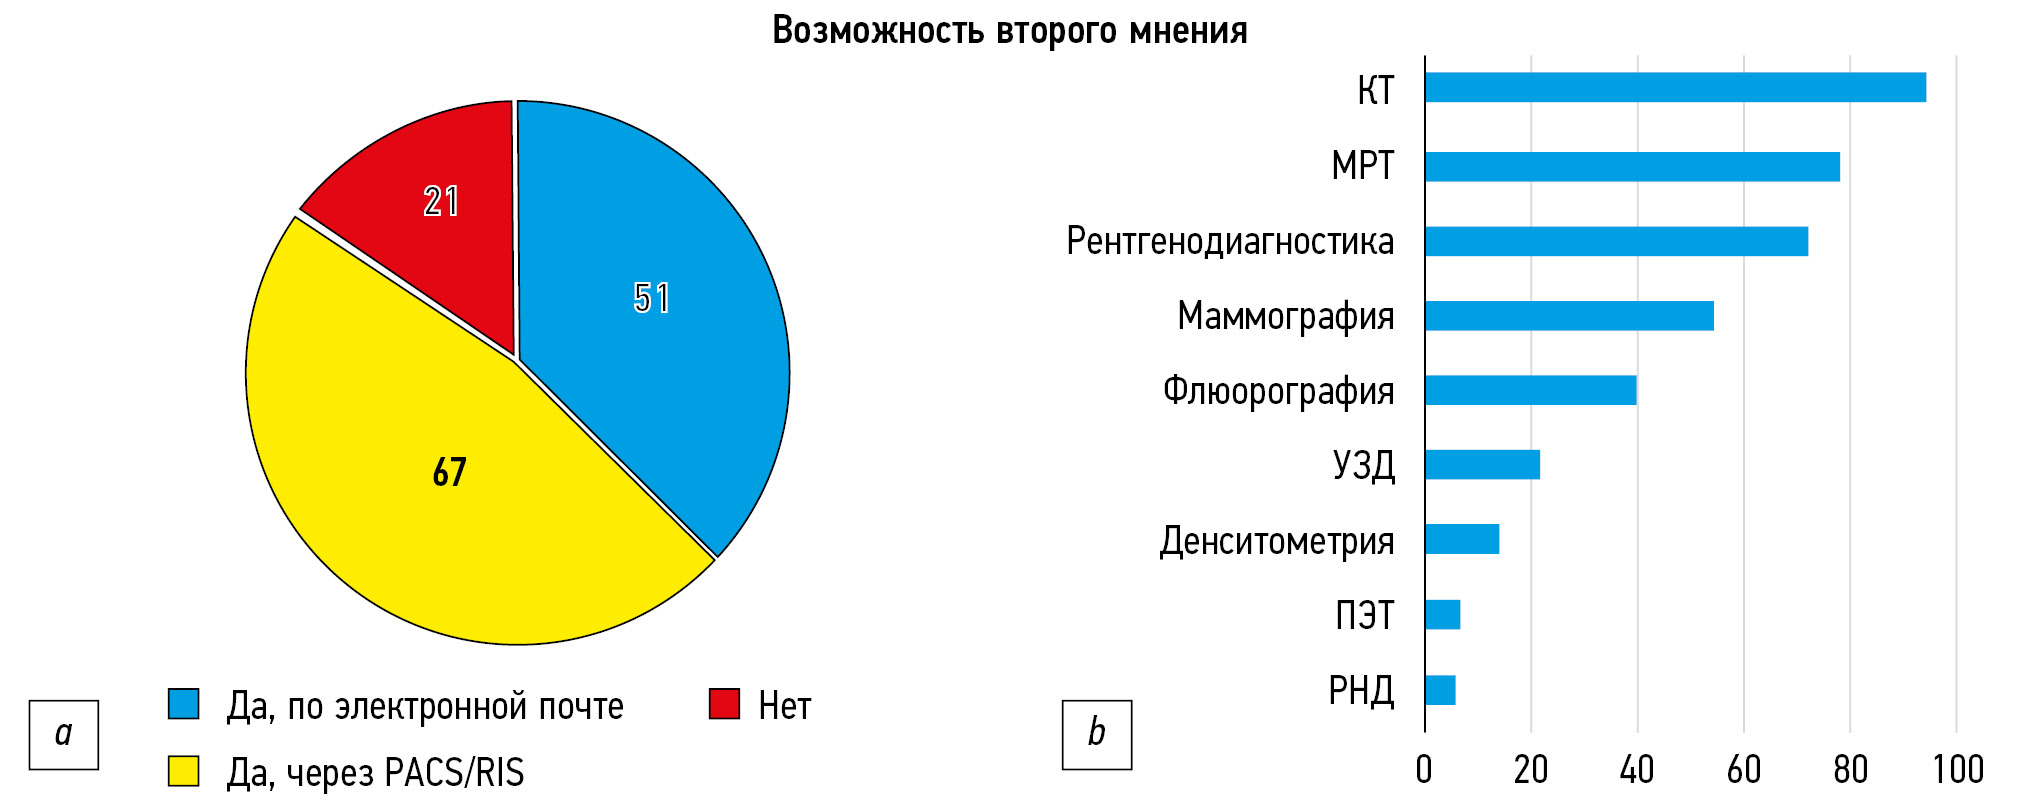 All-Russian rating of radiology departments: 2020 competition results